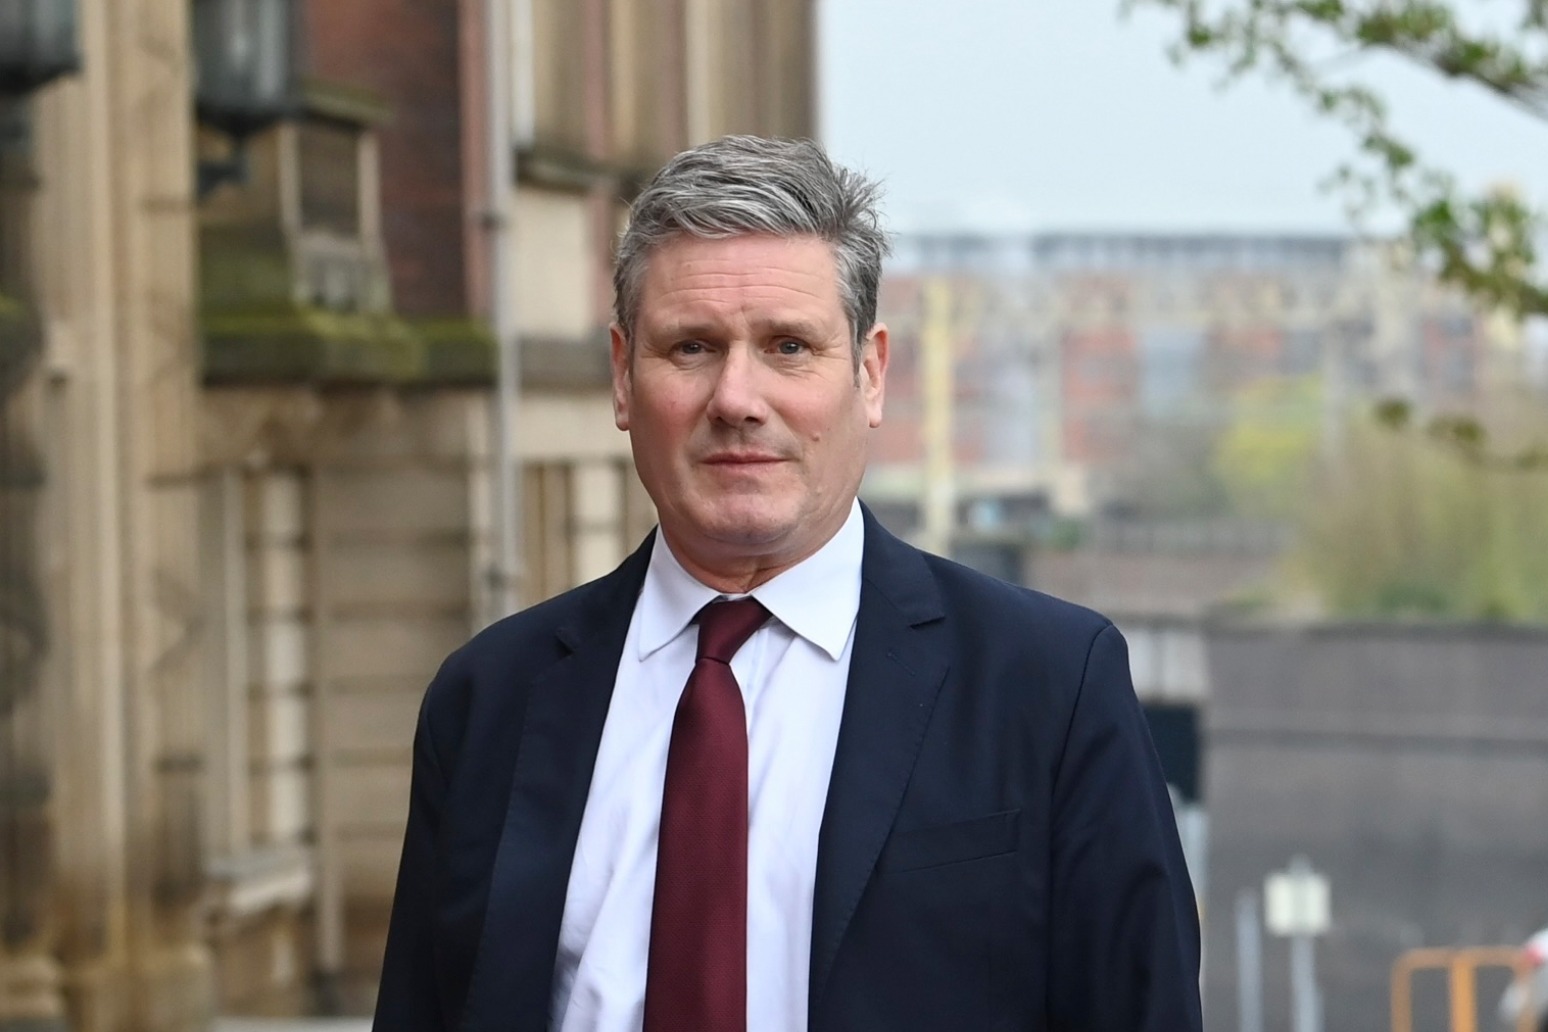 Tory refusal to vote down new PM probe shows he has lost support  Starmer